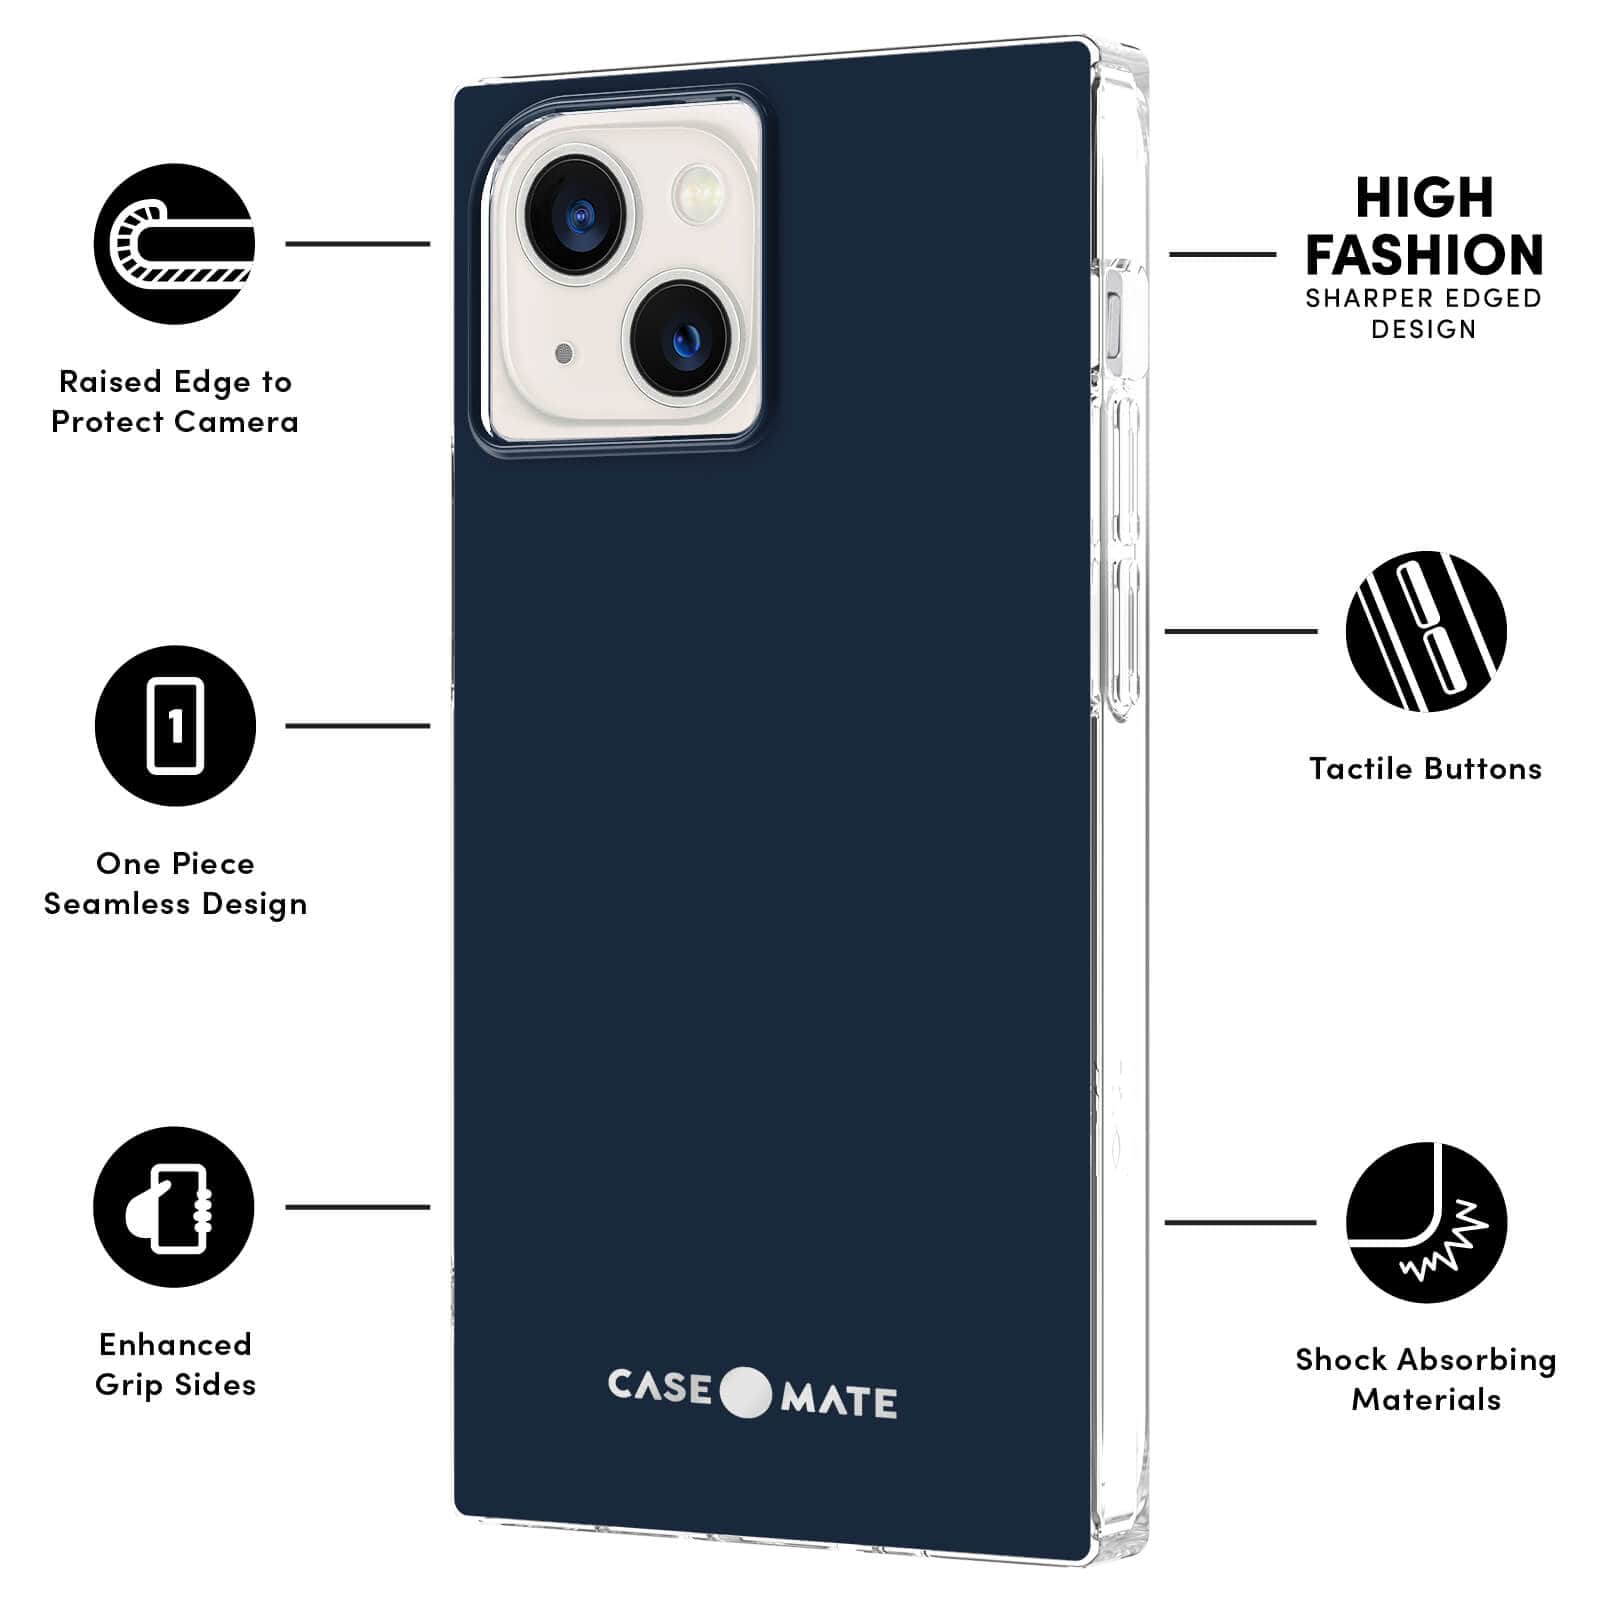 FEATURES: RAISED EDGE TO PROTECT CAMERA, ONE PIECE SEAMLESS DESIGN, ENHANCED GRIP SIDES, HIGH FASHION SHARPER EDGE DESIGN, TACTILE BUTTONS, SHOCK ABSORBING MATERIALS. COLOR::NAVY